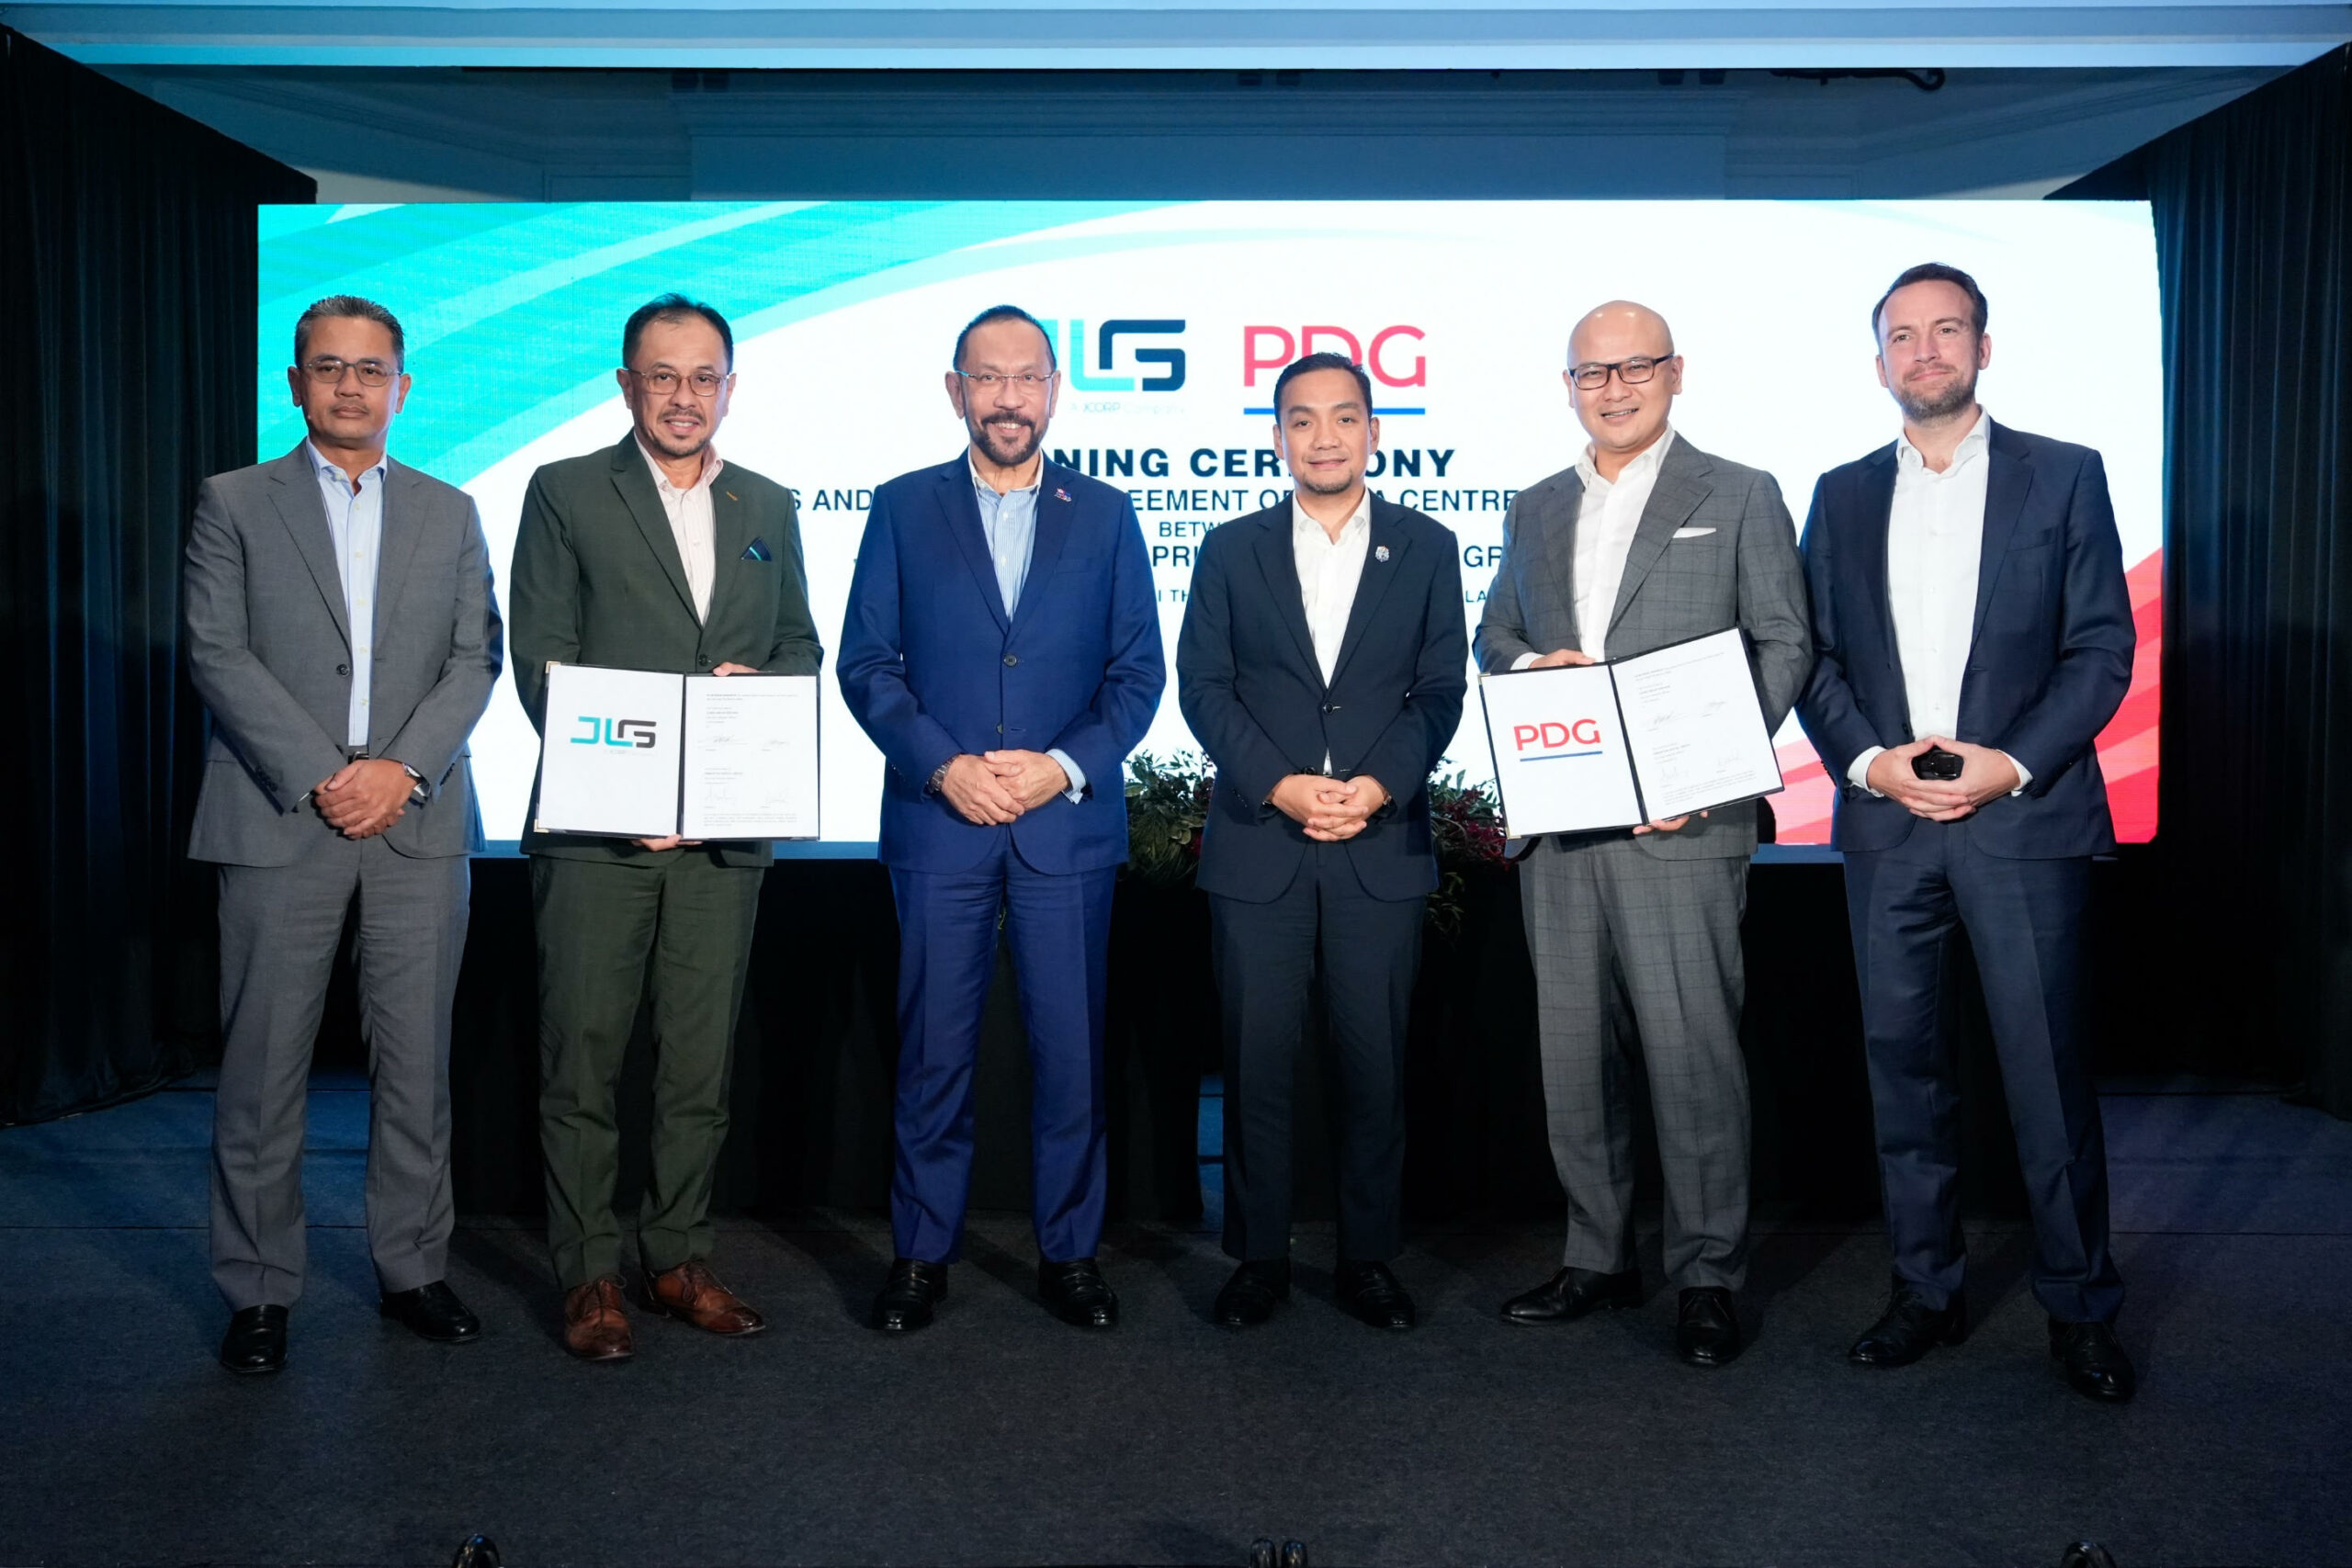 PDG and JLG signing ceremony in Kuala Lumpur